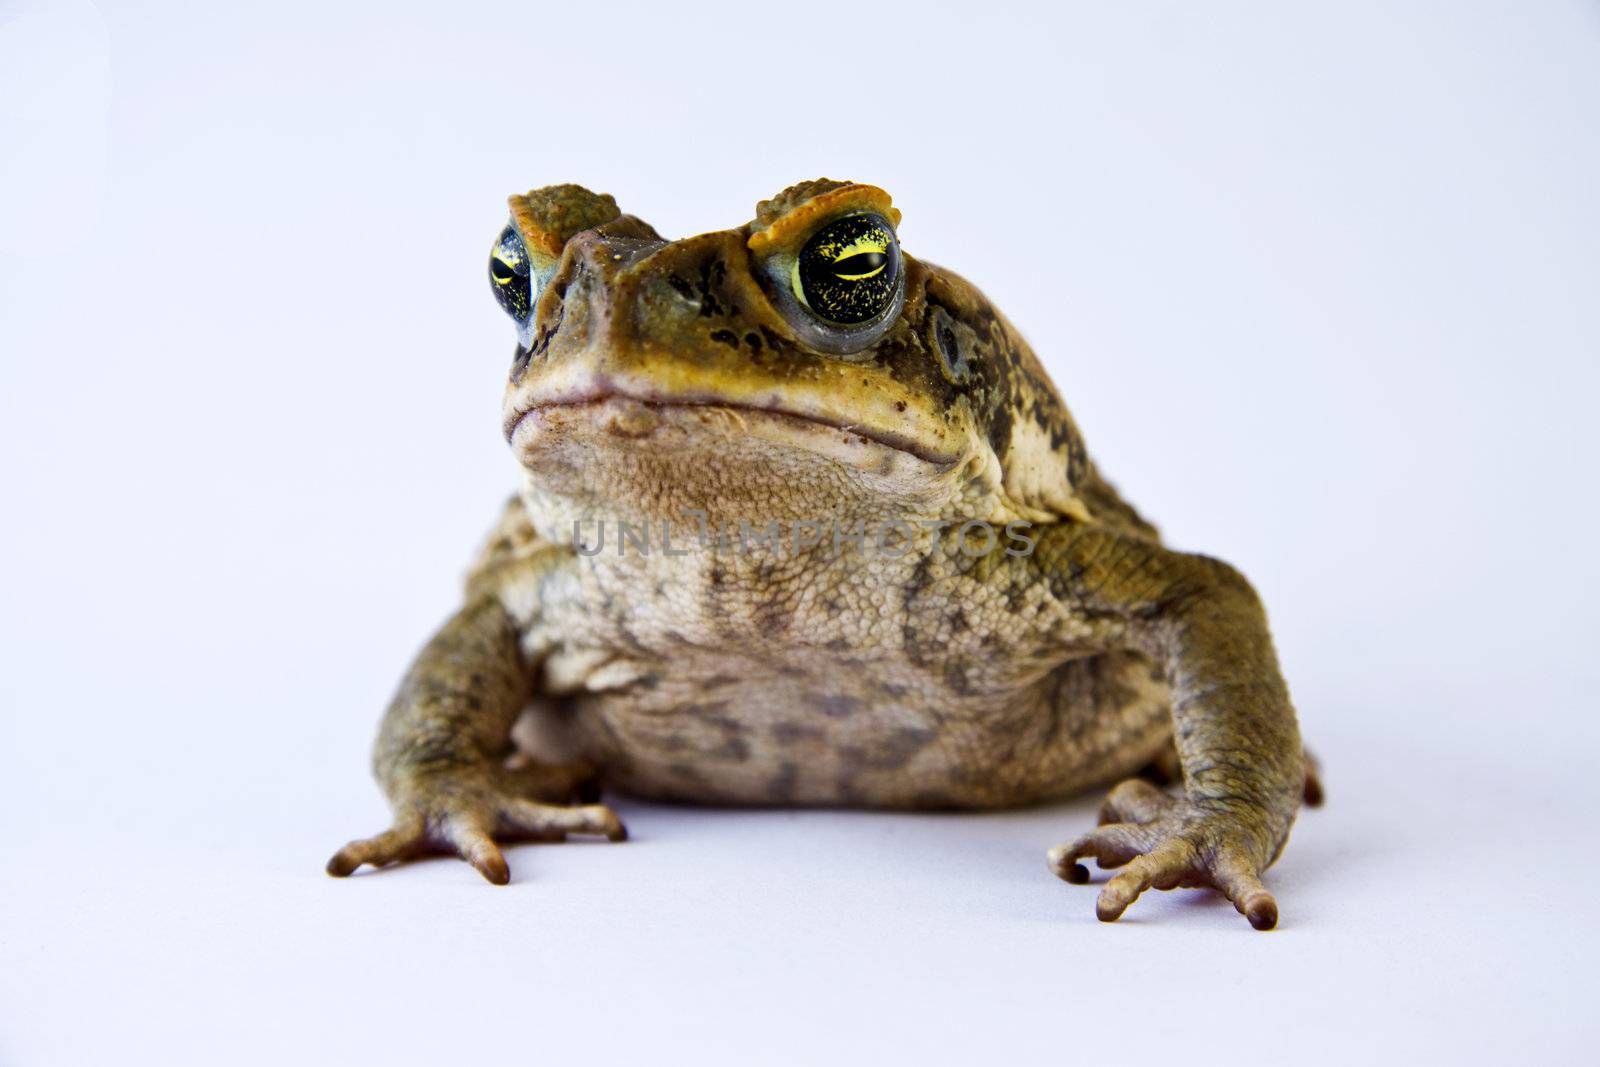 Cane toad (Bufos marinus) closeup and isolated over white